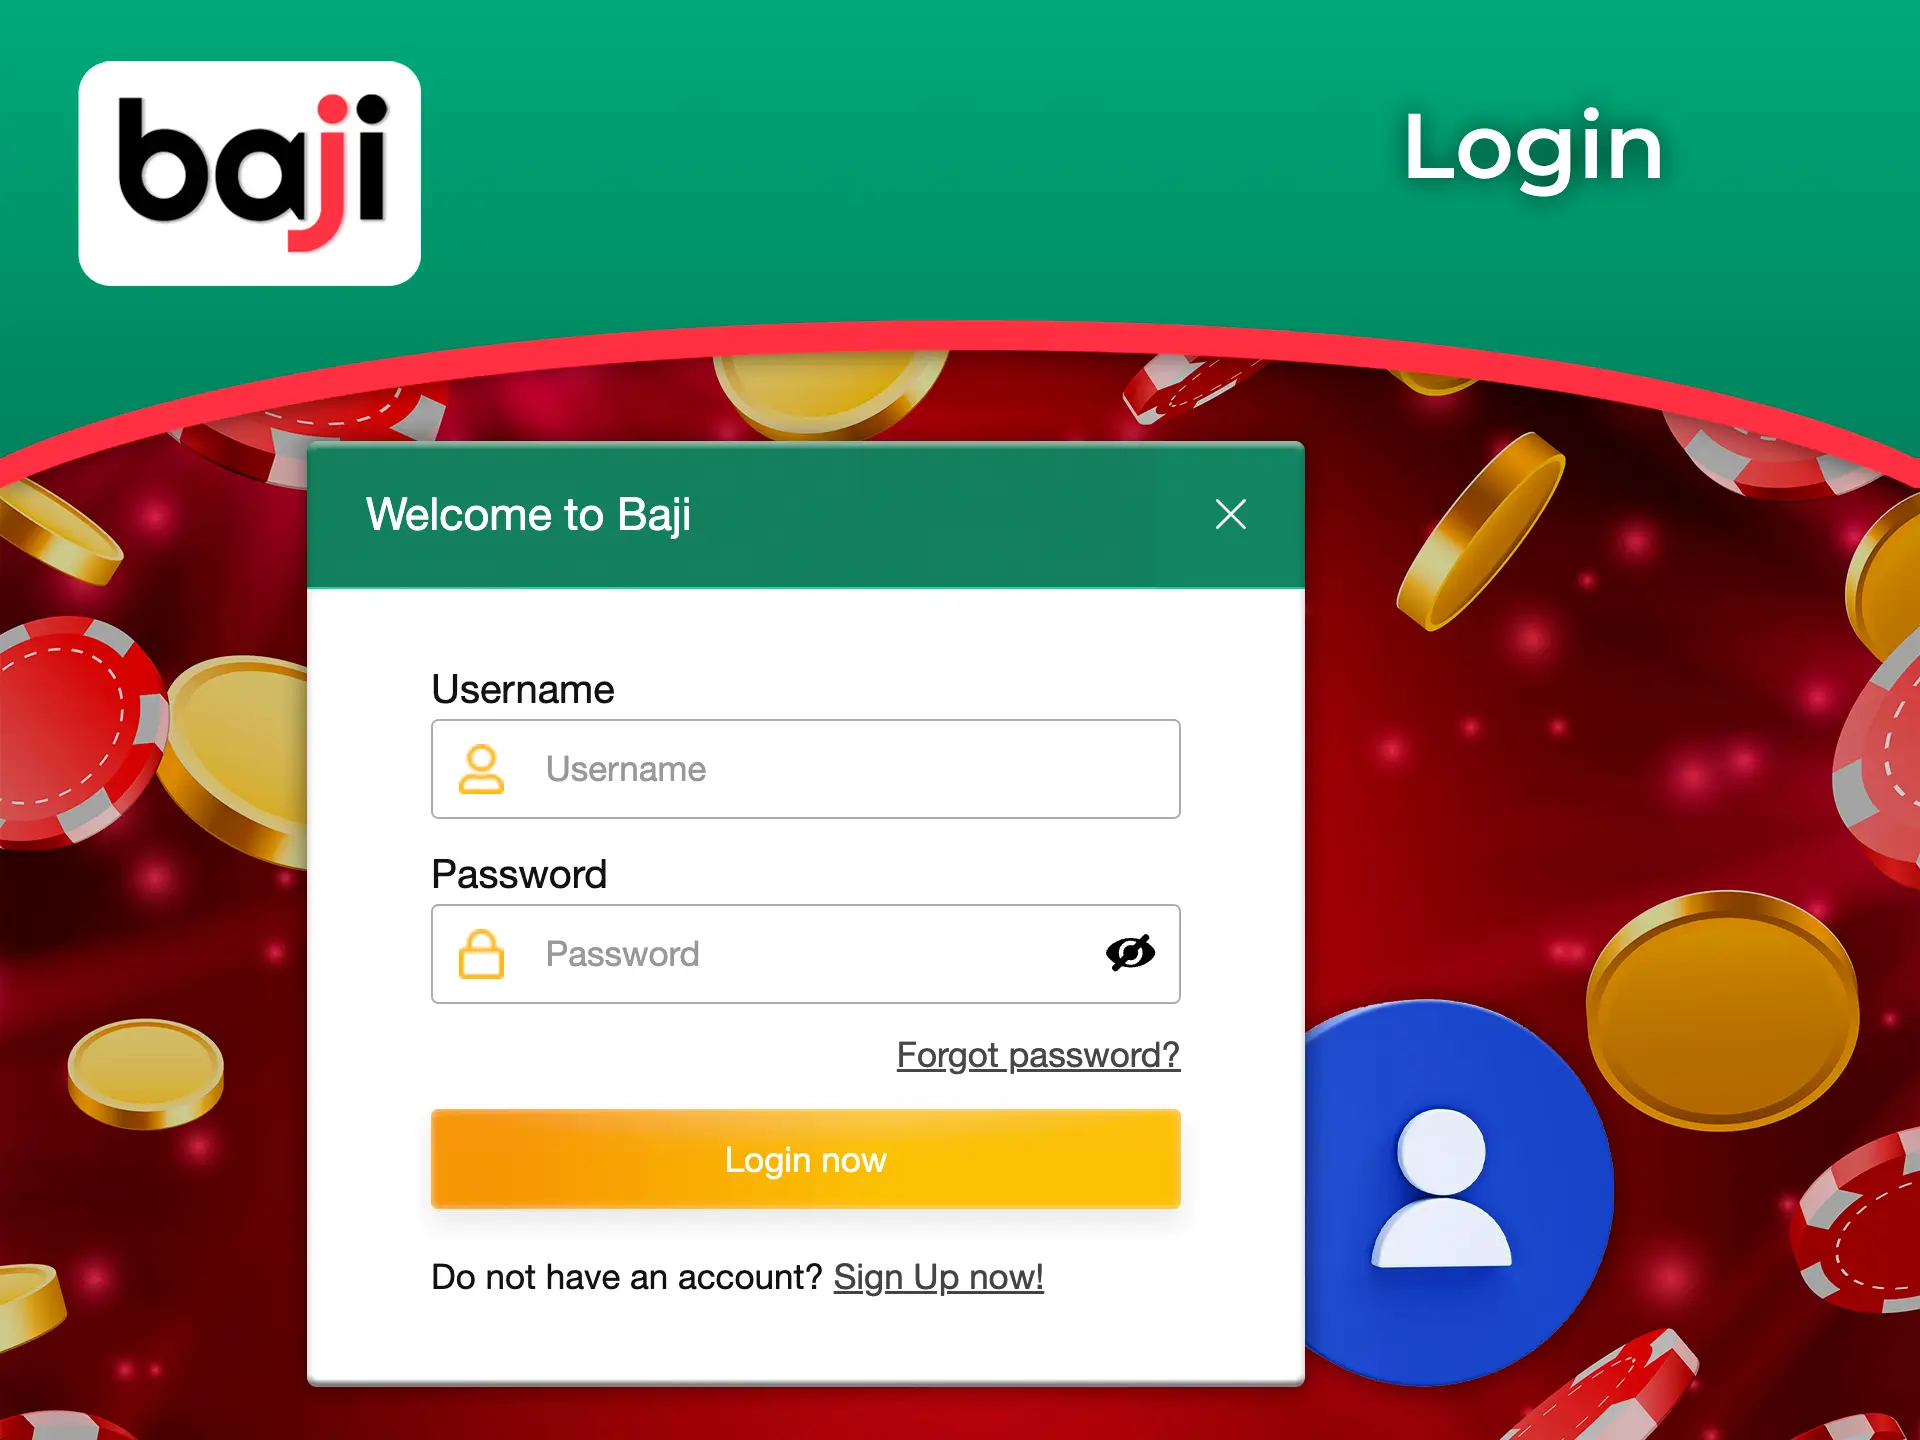 Log in to your personal Baji account and get full access to all popular slots and casino games.